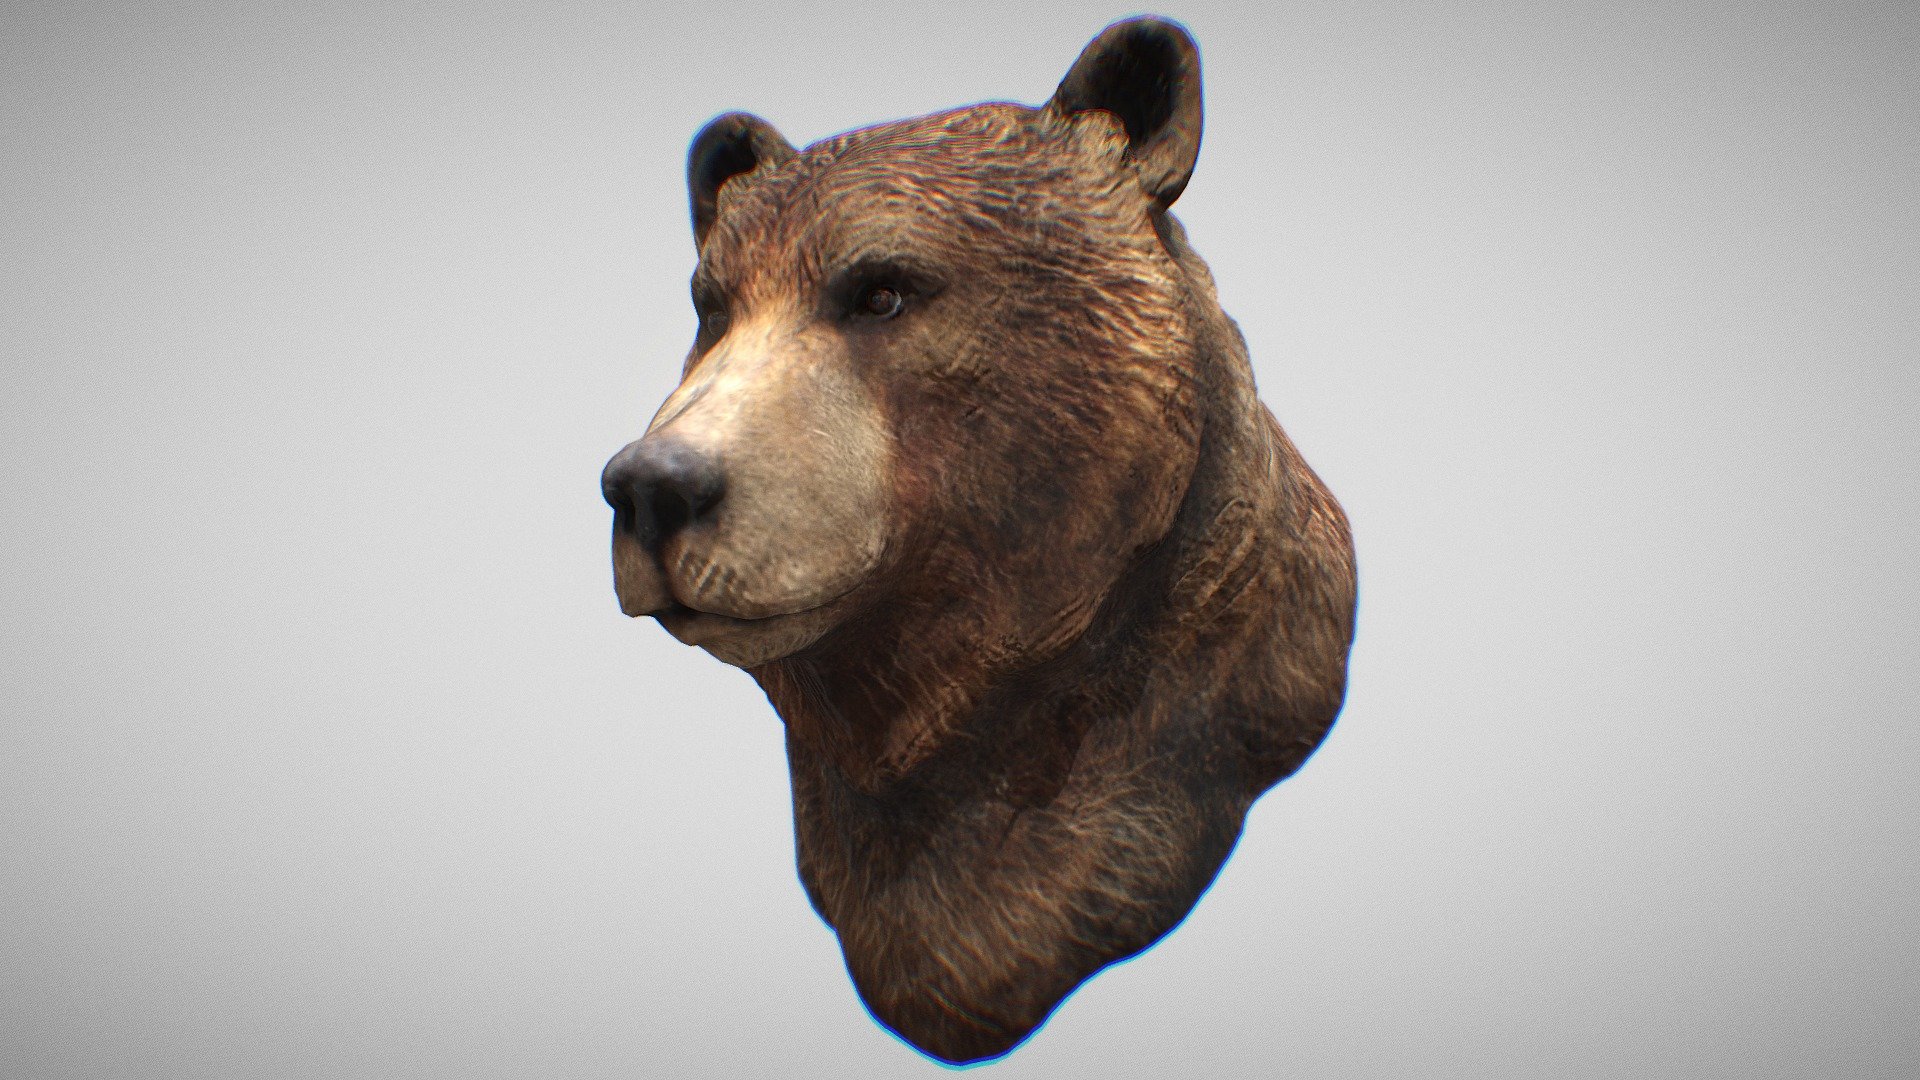 The grizzly bear (Ursus arctos horribilis), also known as the North American brown bear or simply grizzly, is a large population or subspecies of the brown bear inhabiting North America.

https://en.wikipedia.org/wiki/Grizzly_bear

A bust sculpted and polypaint textured in zbrush. A full body sculpt and manual retopo/UV coming soon.

see more of my work on my website and instagram:

https://www.tomjohnsonart.co.uk/

https://www.instagram.com/tomjohnsonart/ - Grizzly Bear - Buy Royalty Free 3D model by Tom Johnson (@Brigyon) 3d model